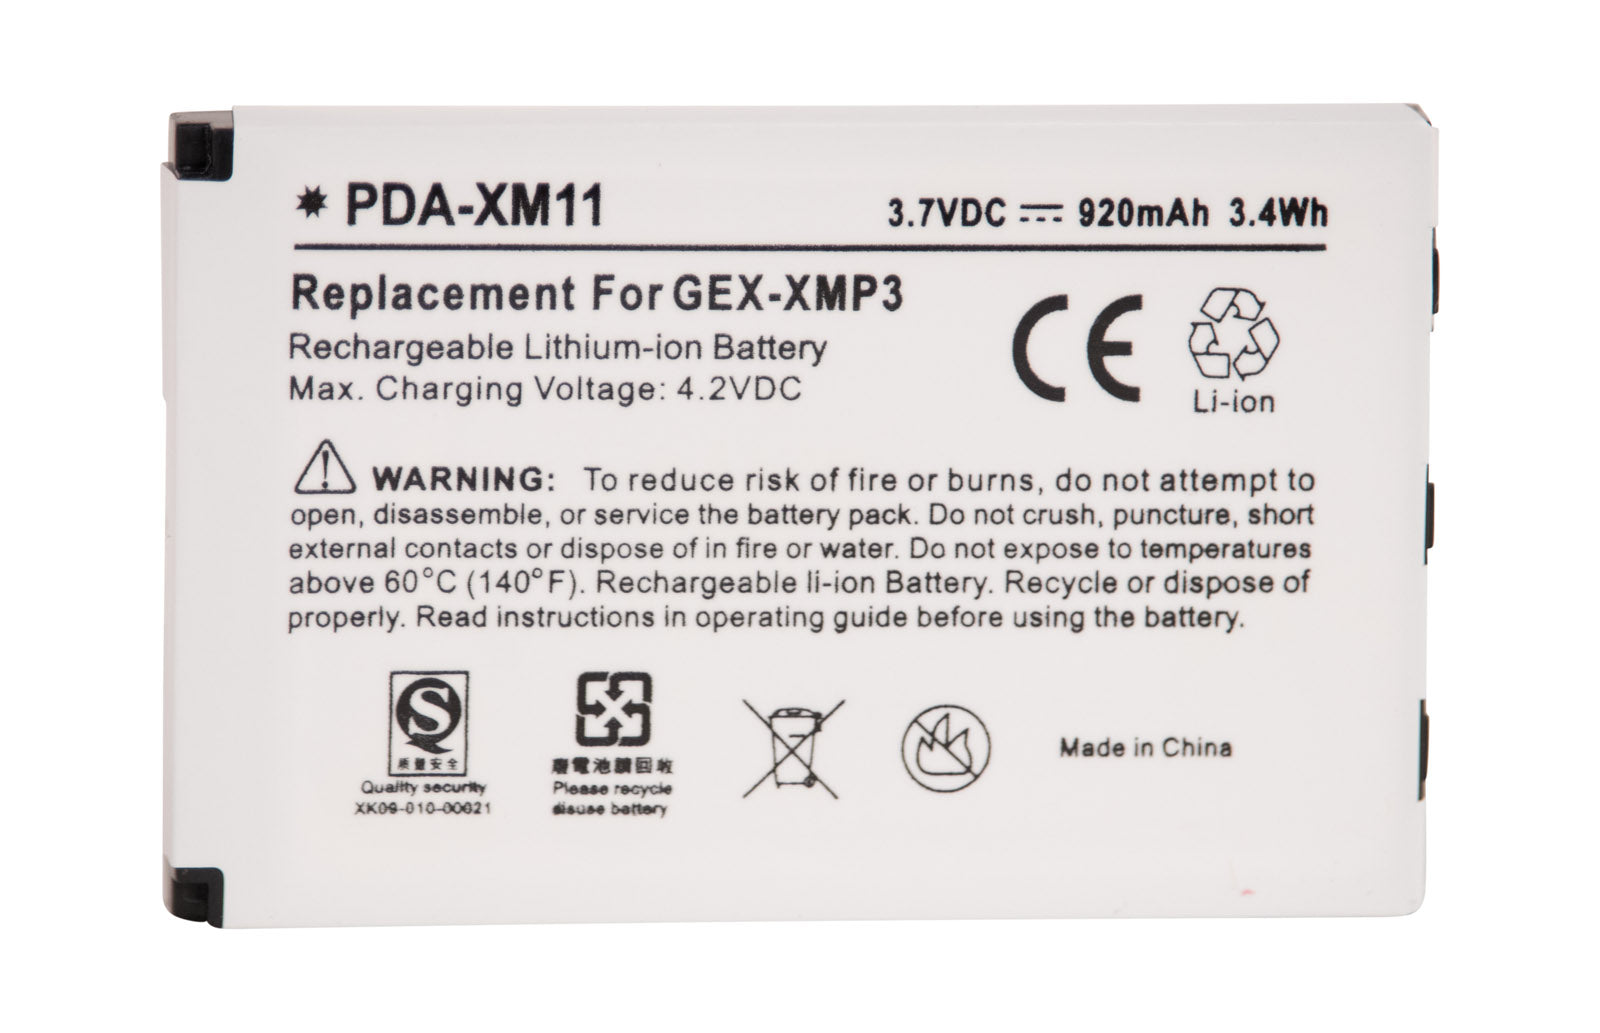 Battery for XMP3i and XMP3 Portable XM Satellite Radio receivers